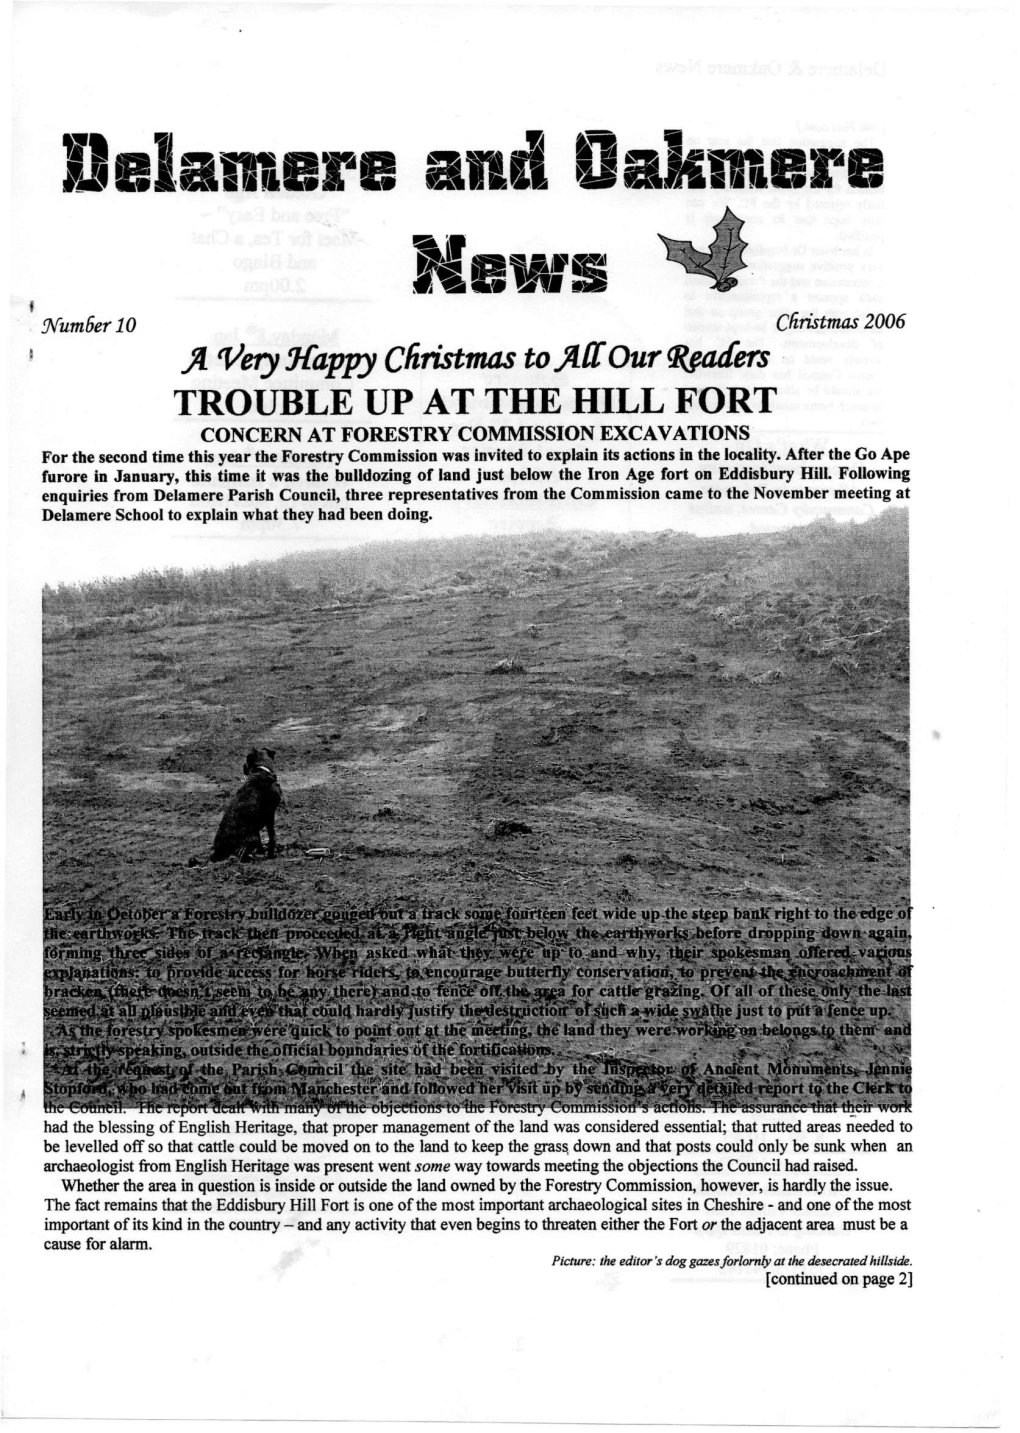 Trouble up at the Hill Fort